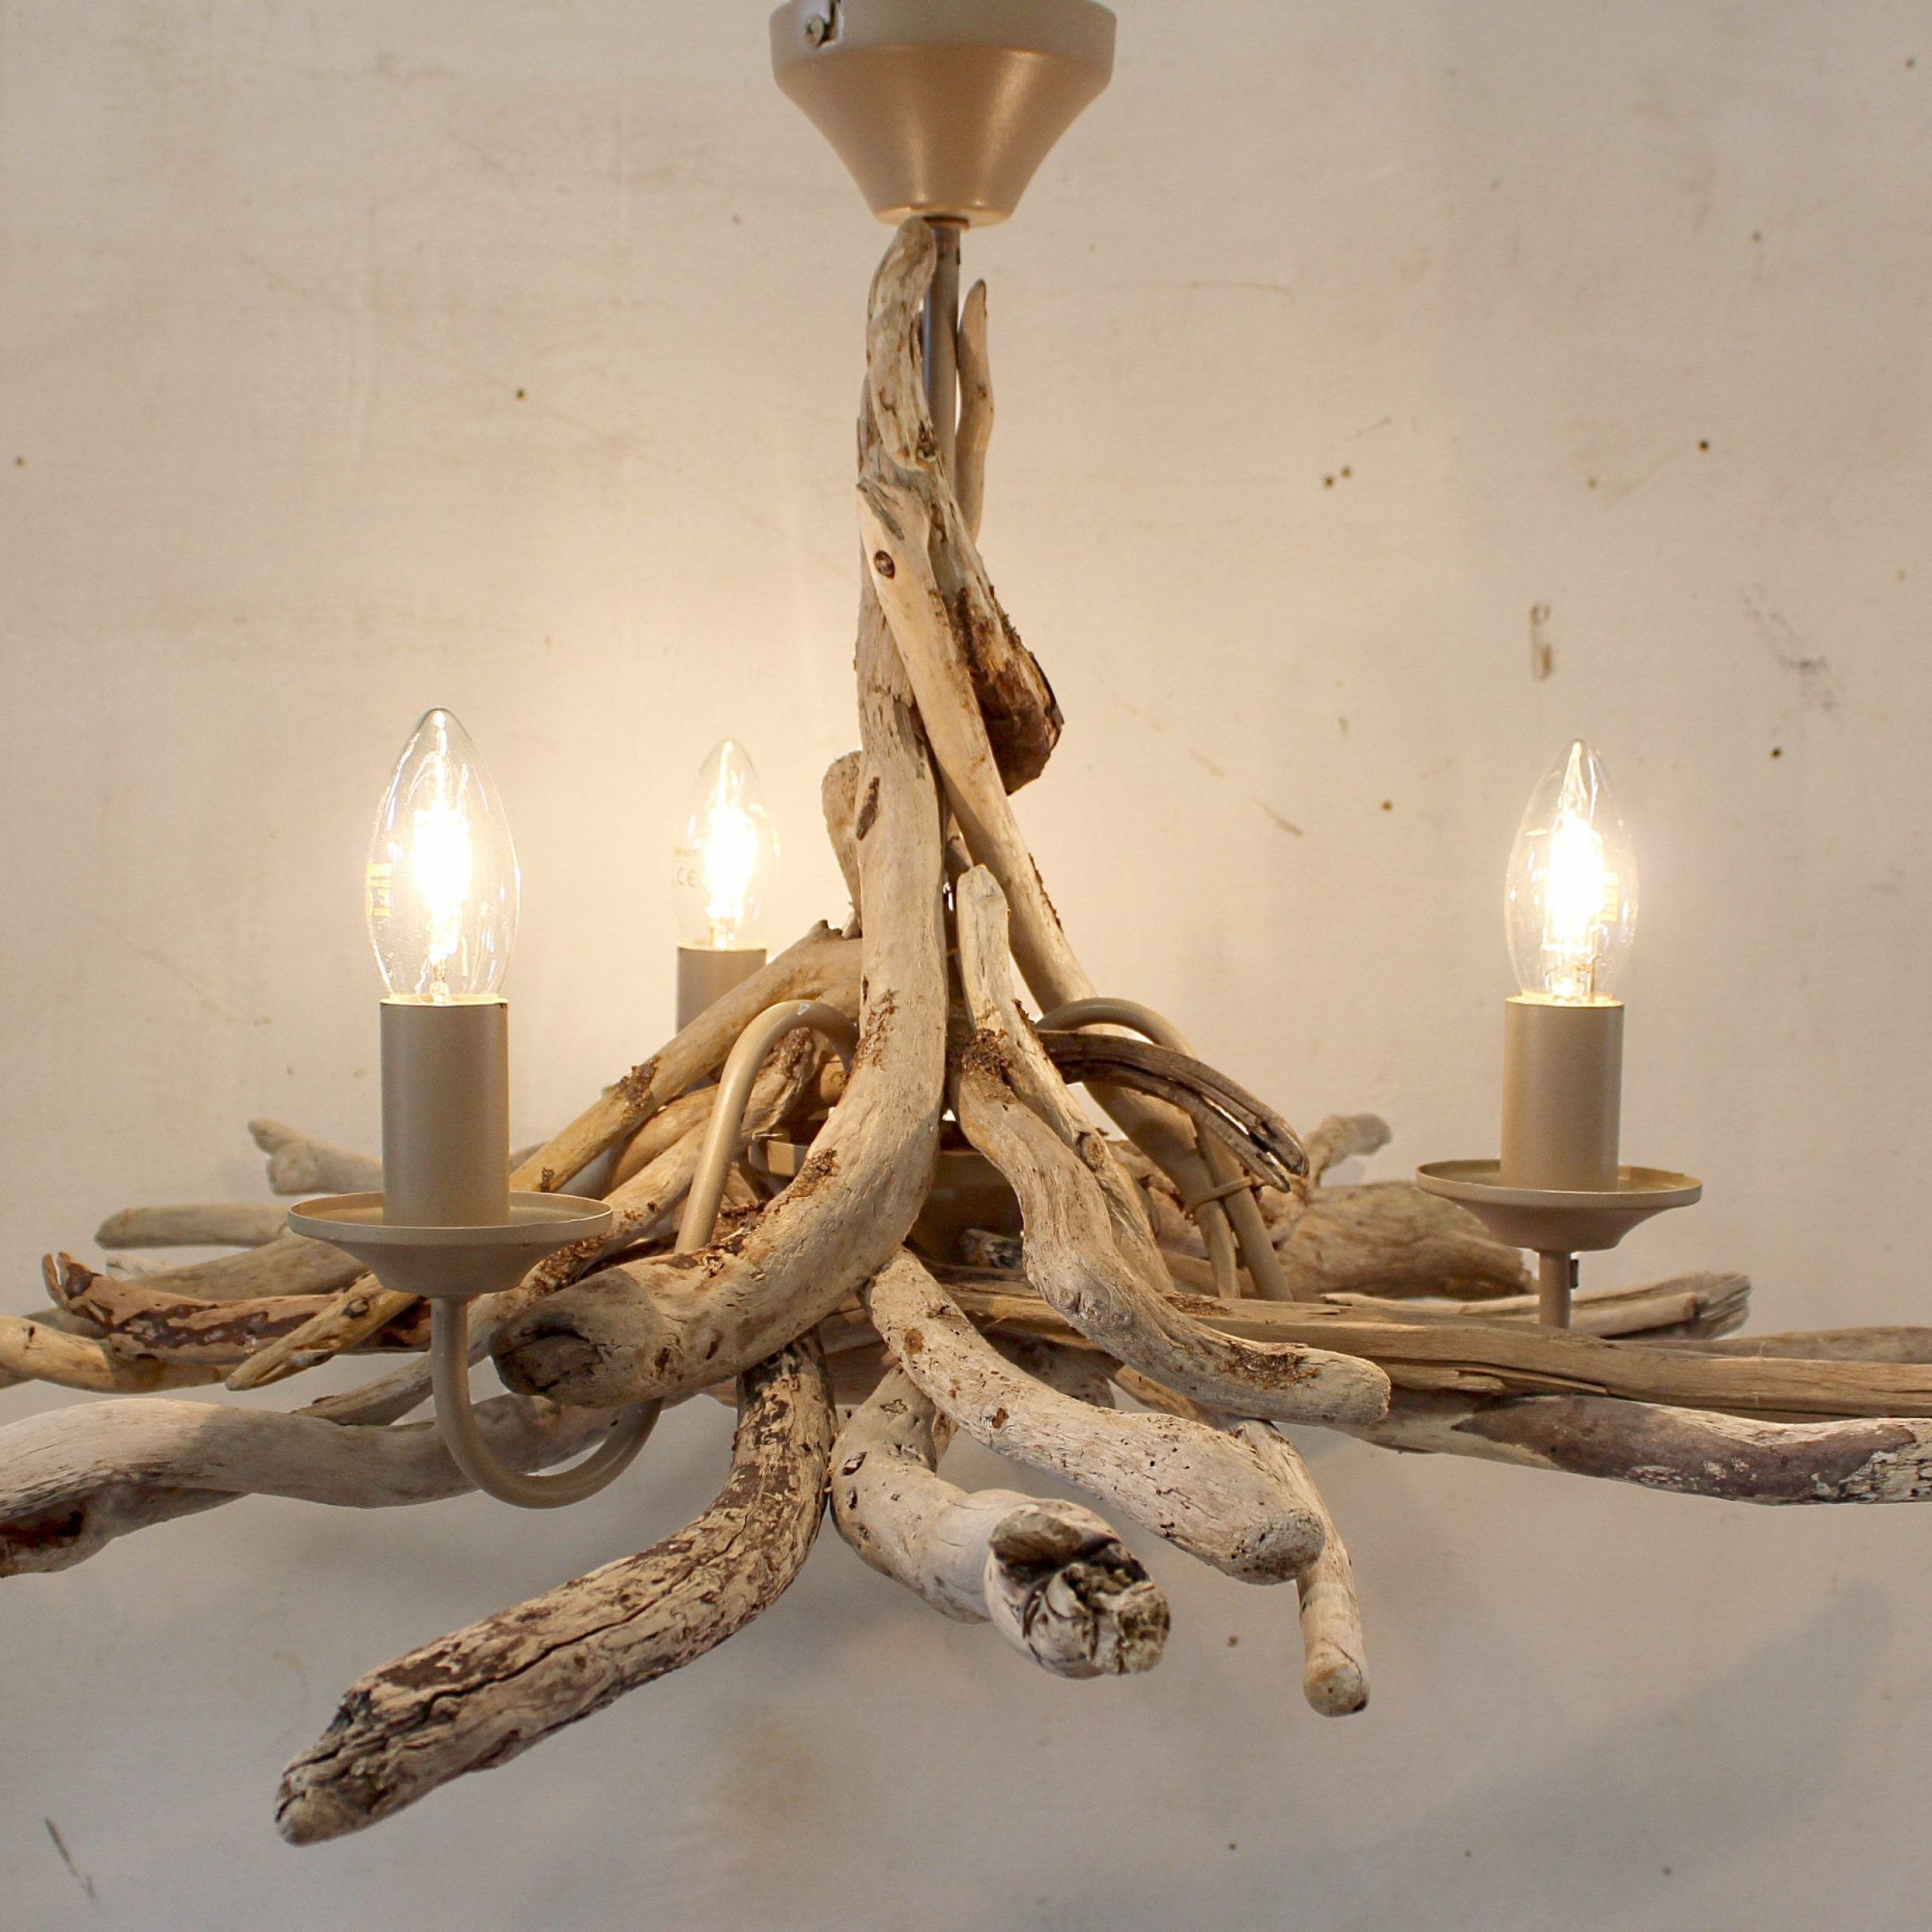 Driftwood Chandelier Driftwood Pendant Driftwood Light – Etsy With Driftwood Lantern Chandeliers (View 6 of 15)